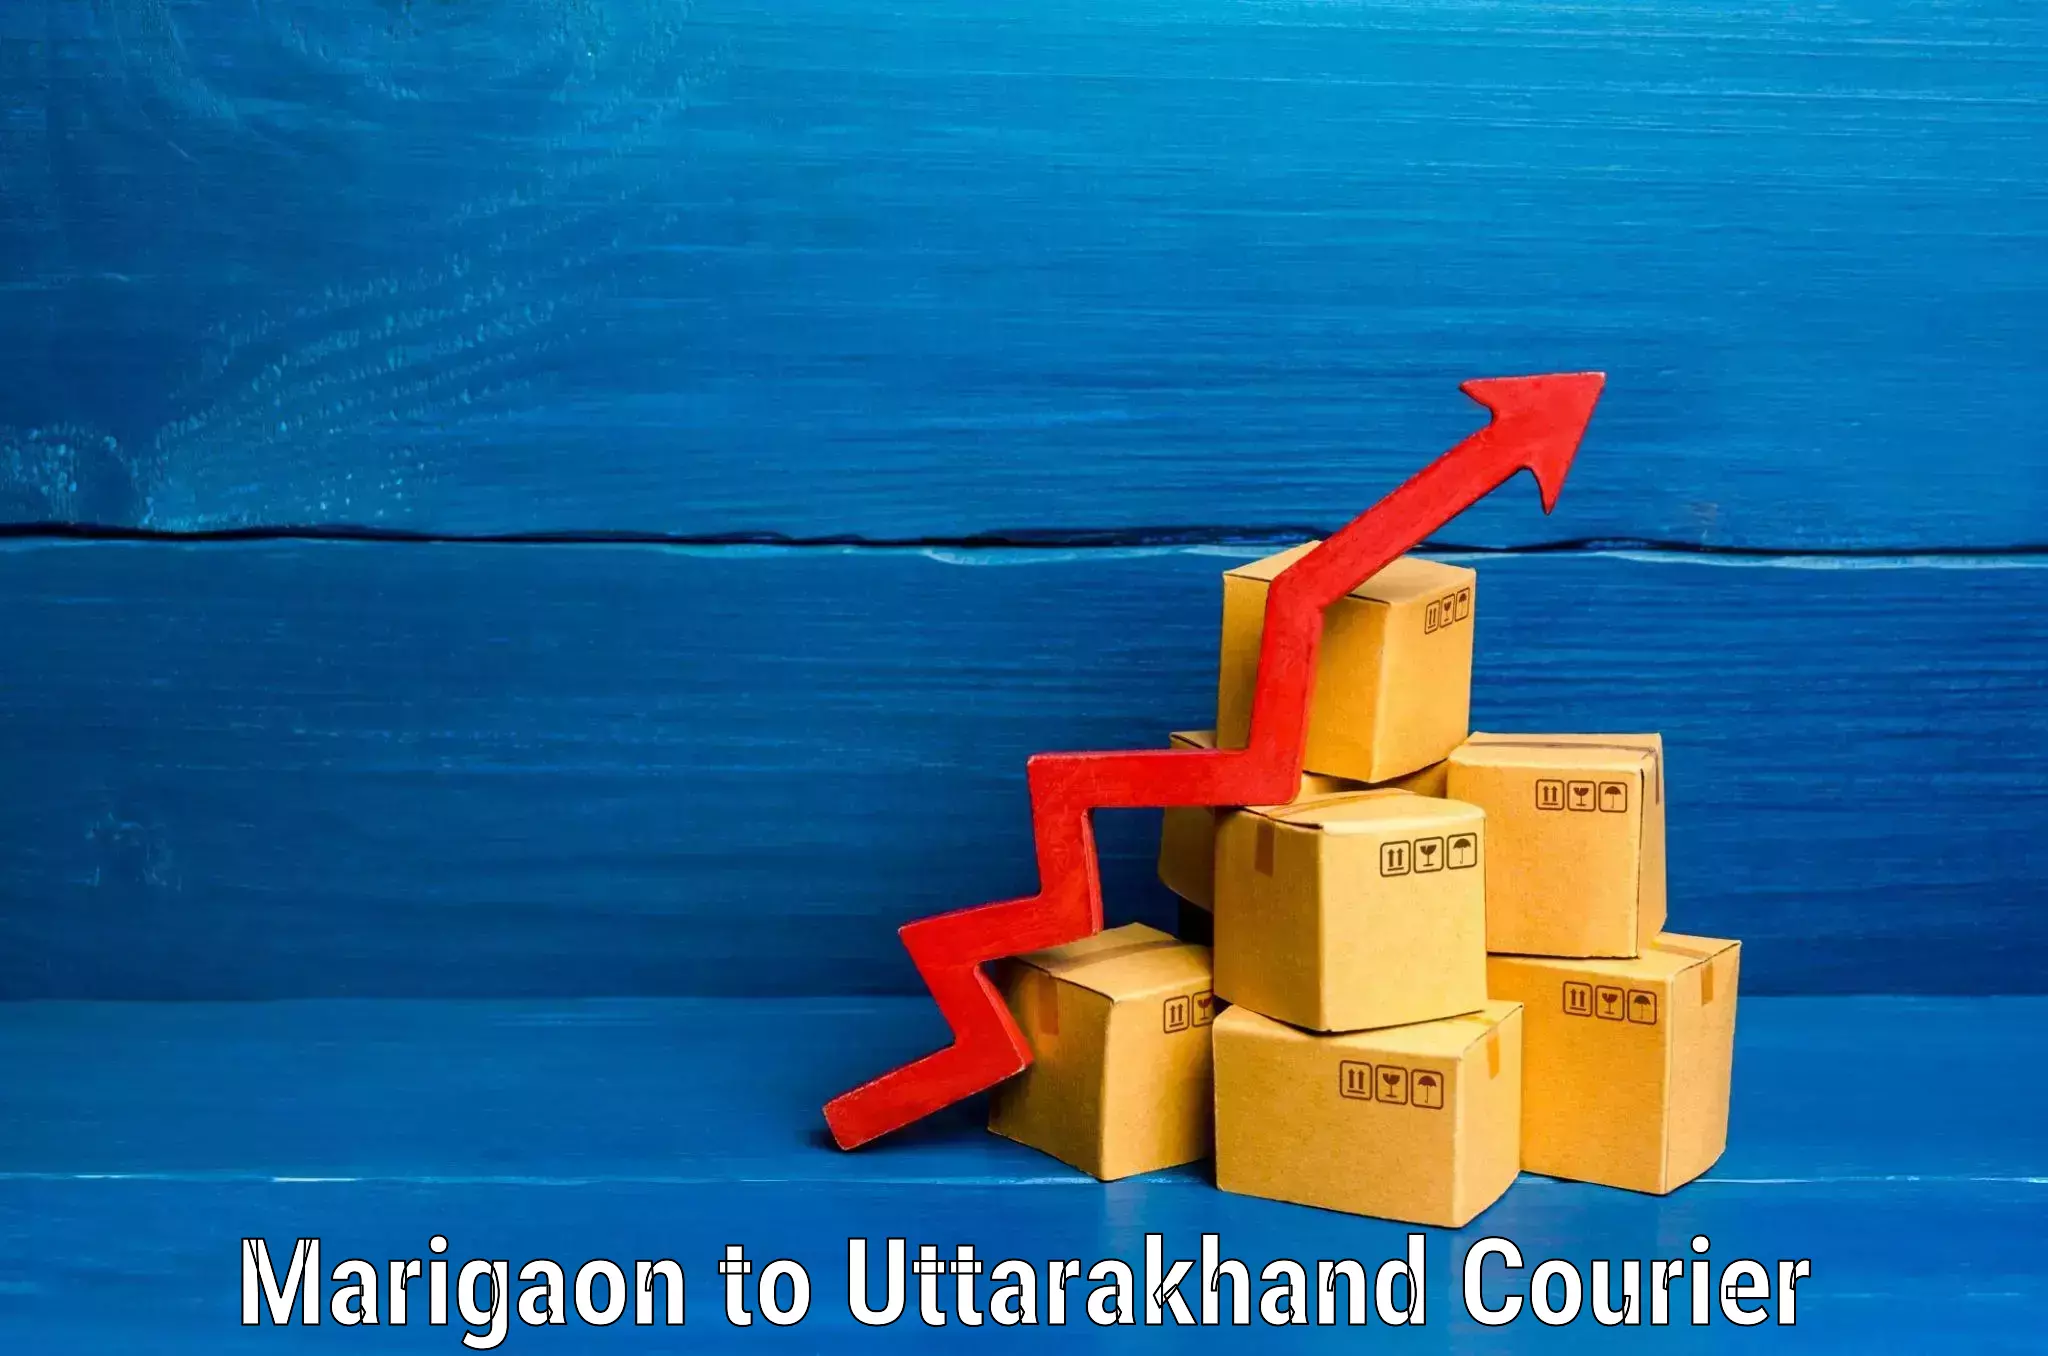 Luggage shipment specialists Marigaon to Rudrapur